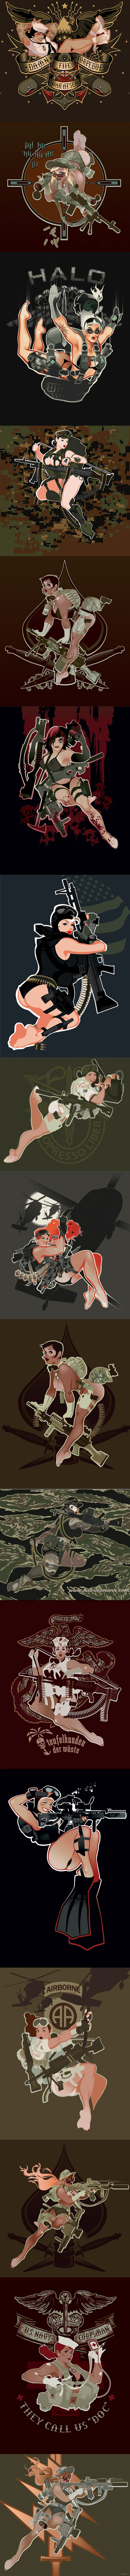 Andrew Bawidamann - Military Pin Up () 